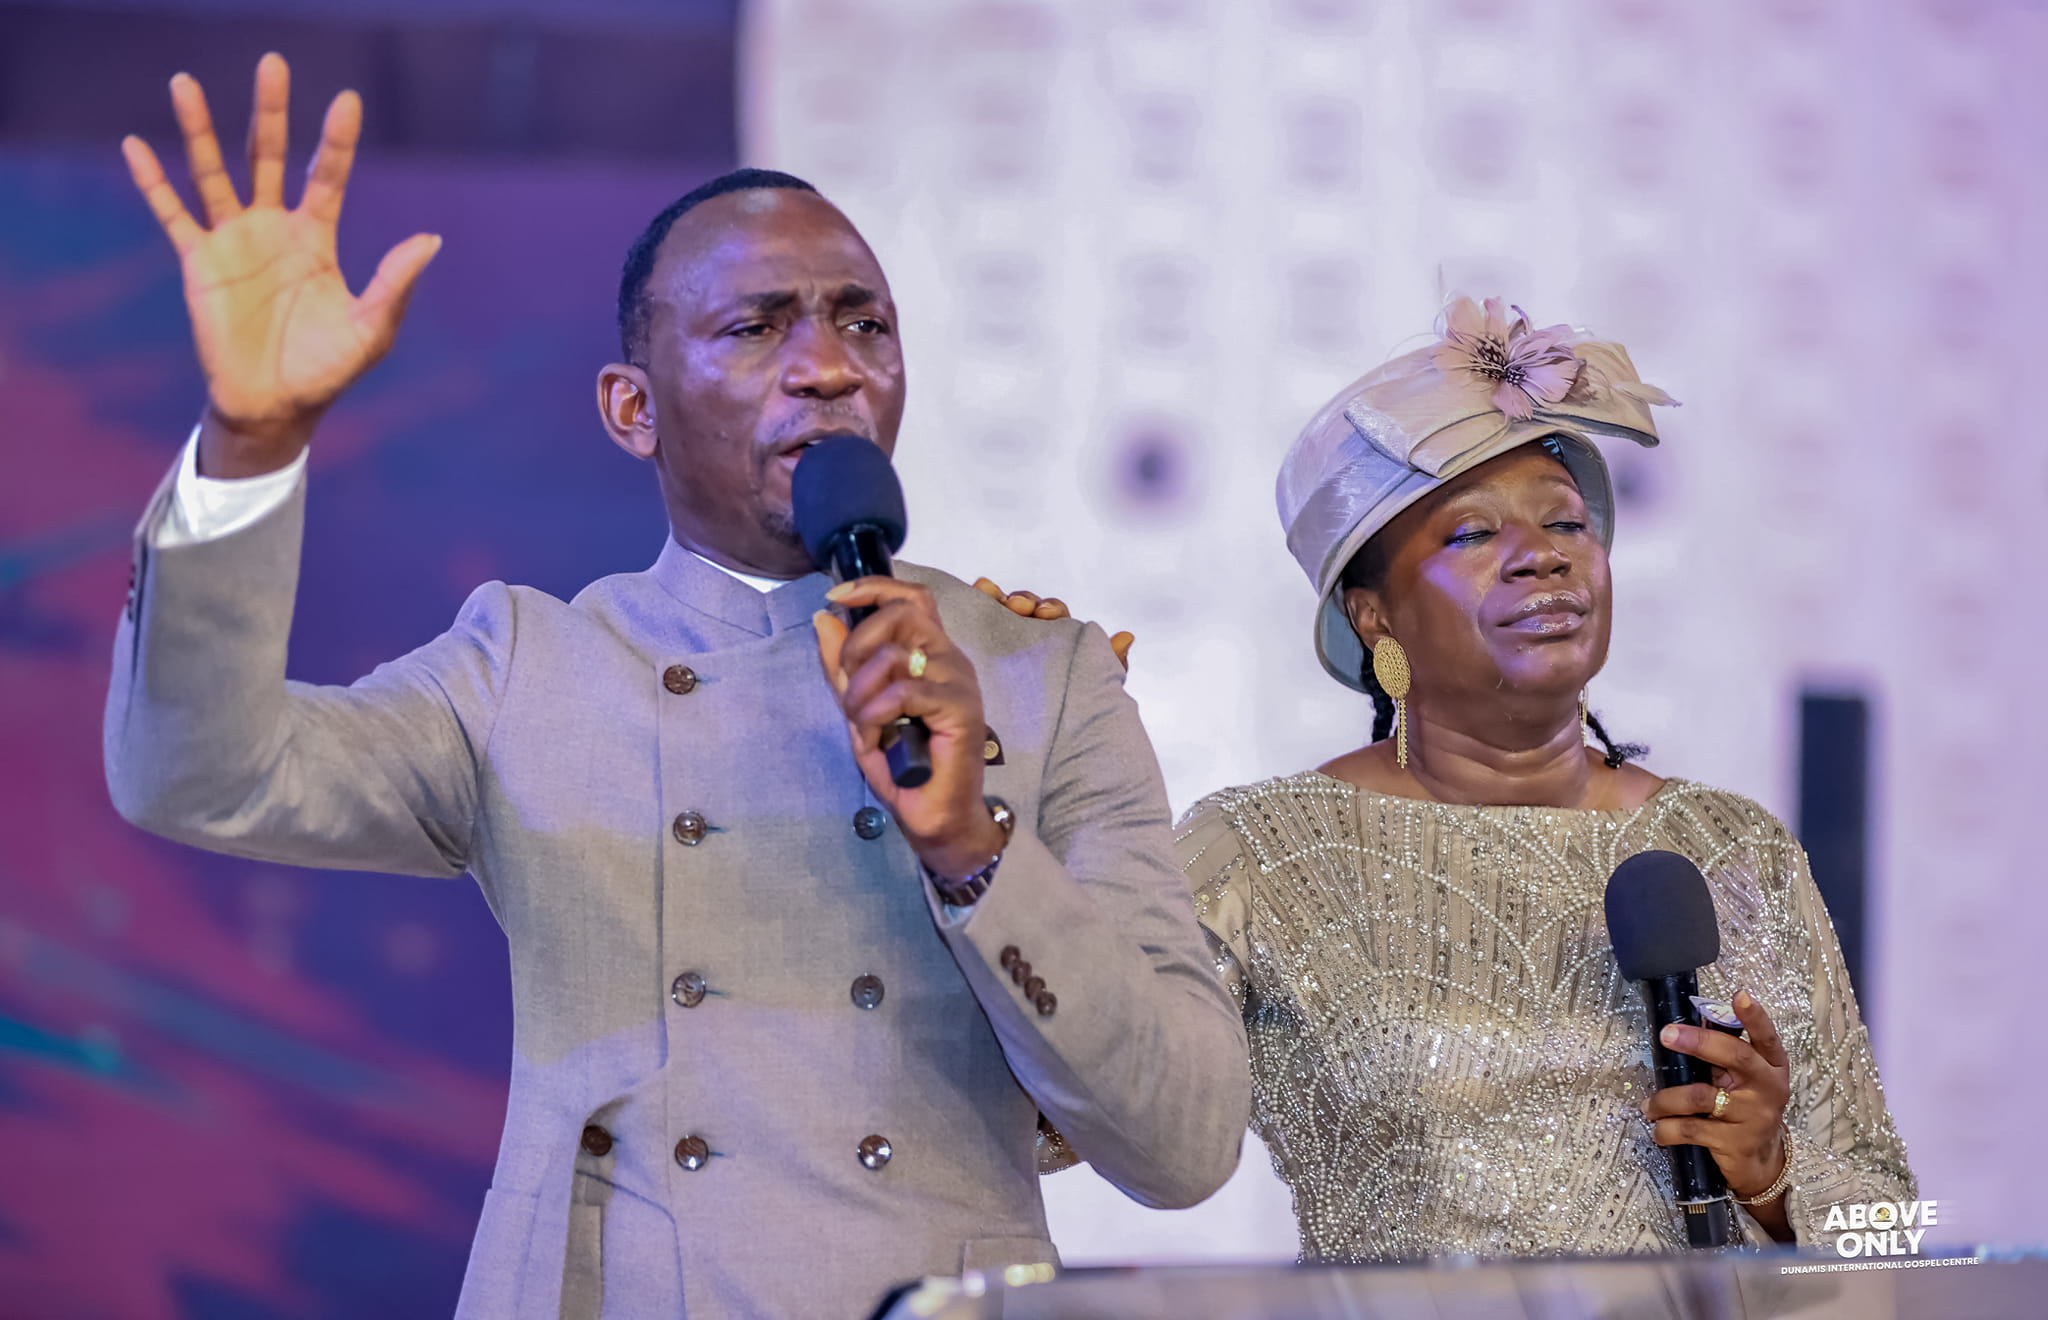 The Blessing of The Word (1&2) mp3 by Dr Paul Enenche